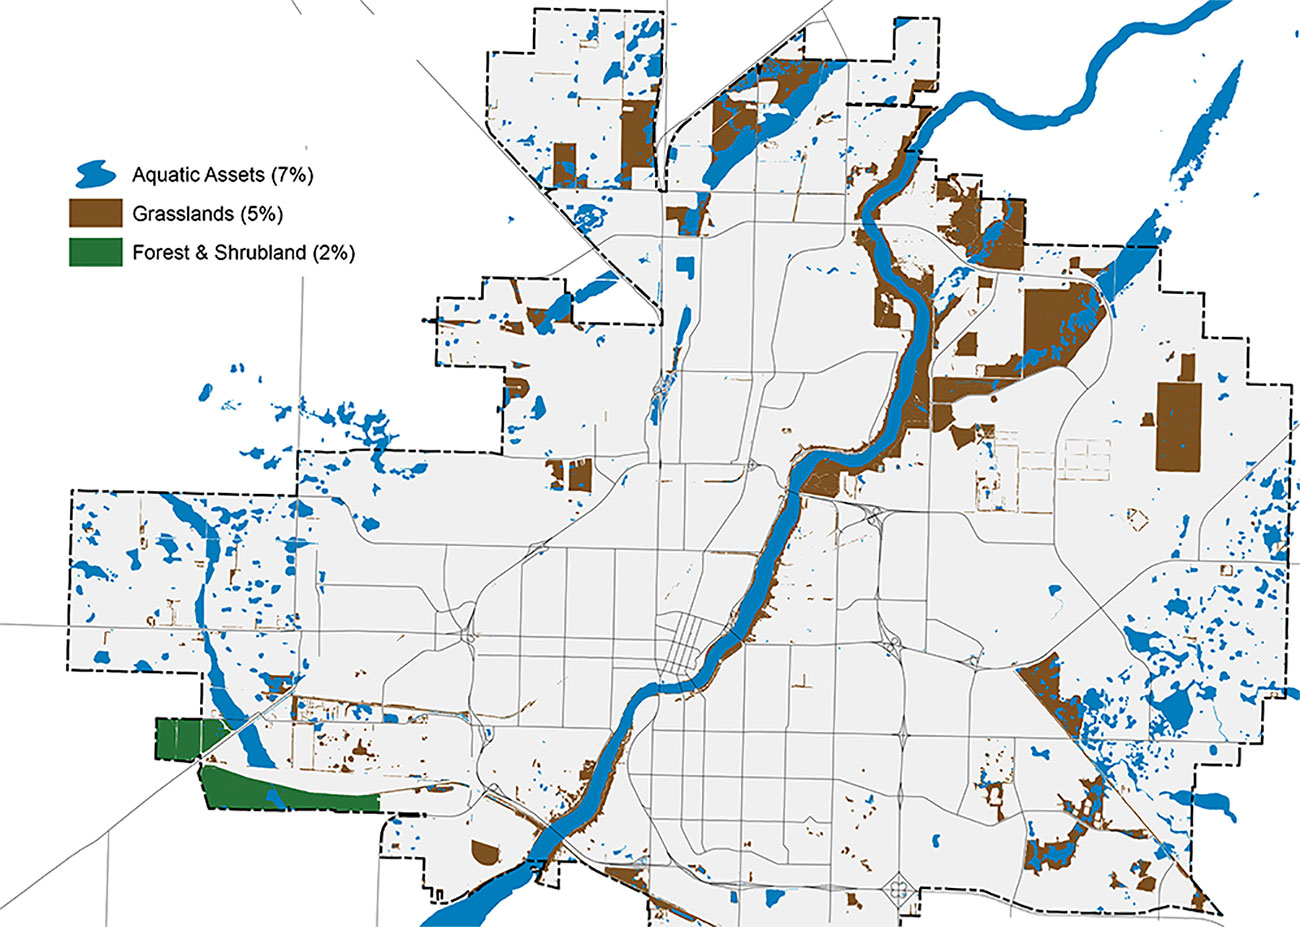  Aerial map of Saskatoon’s city limits, broken down into individual neighbourhoods. The grey map features blue, brown, and green areas, representing aquatic assets, grasslands, and forests &amp;amp;amp; shrubbery, respectively. Aquatic assets make up 7% of the map, grasslands make up 5%, and forests shrubbery make up 2%.